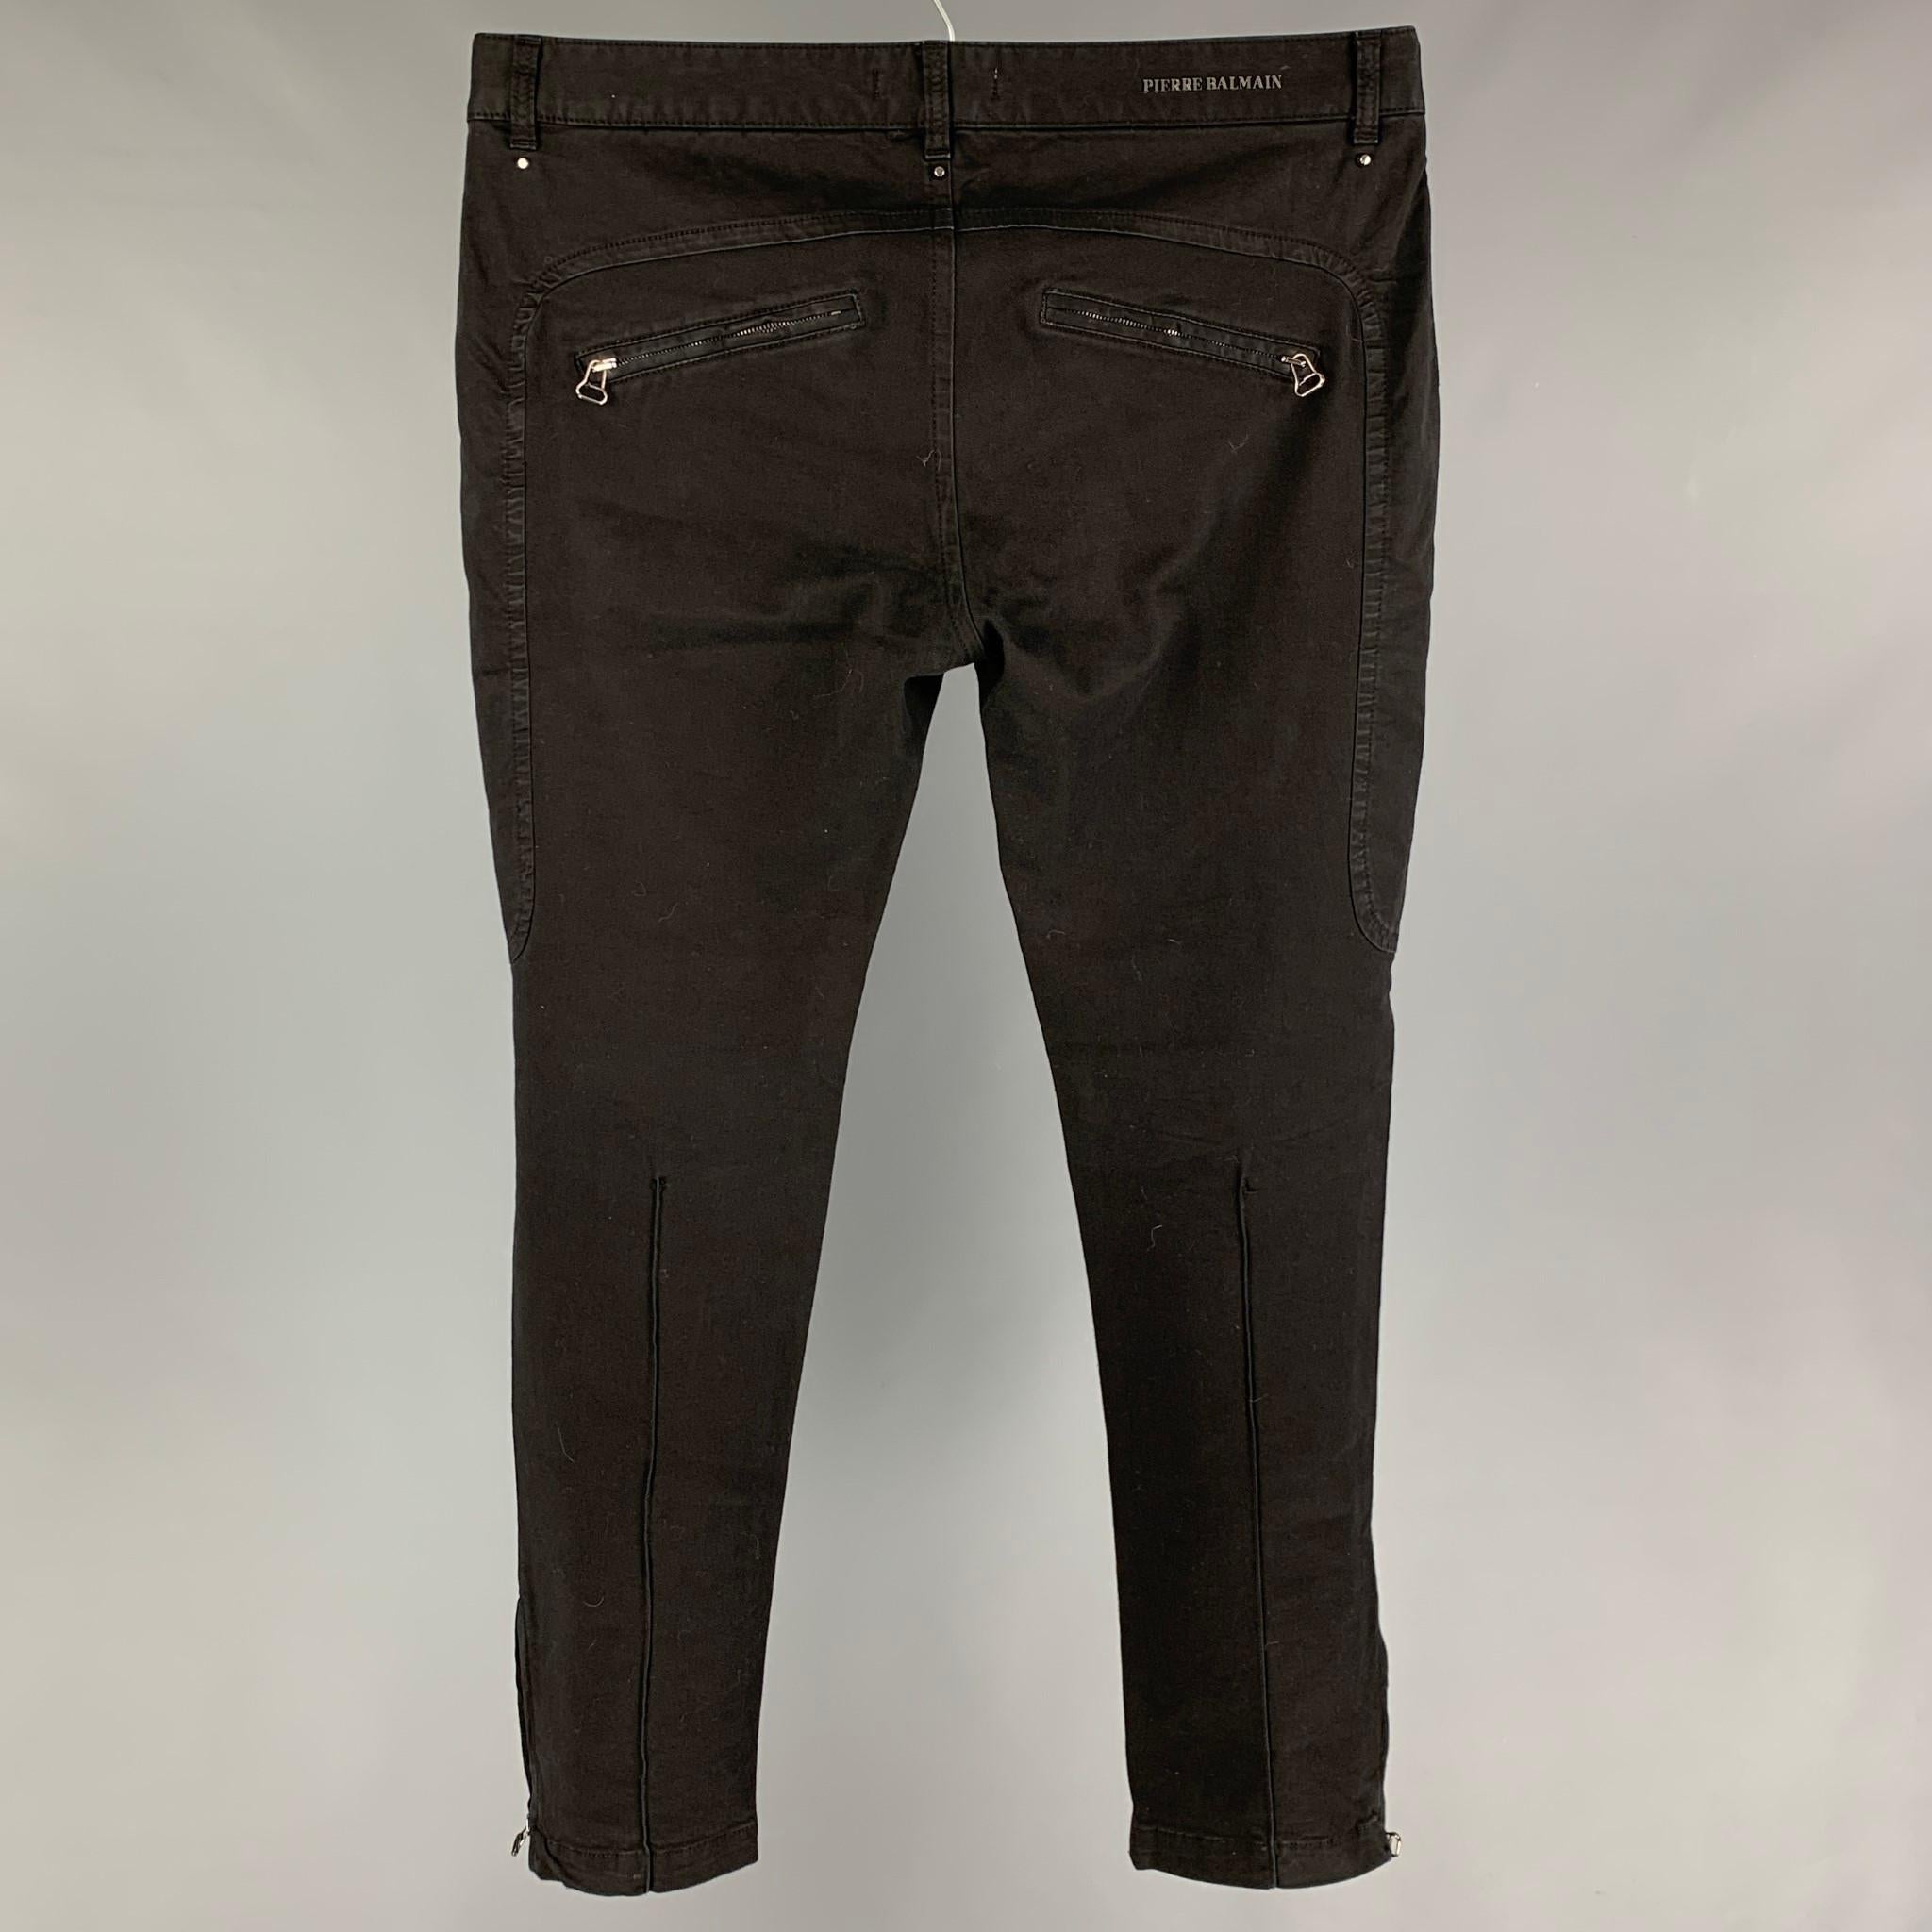 PIERRE BALMAIN jeans comes in a black cotton featuring a slim fit, zipped leg details, silver tone hardware, and a zip fly closure. Made in Italy. 

Very Good Pre-Owned Condition.
Marked: 36/50

Measurements:

Waist: 37 in.
Rise: 9.5 in.
Inseam: 32